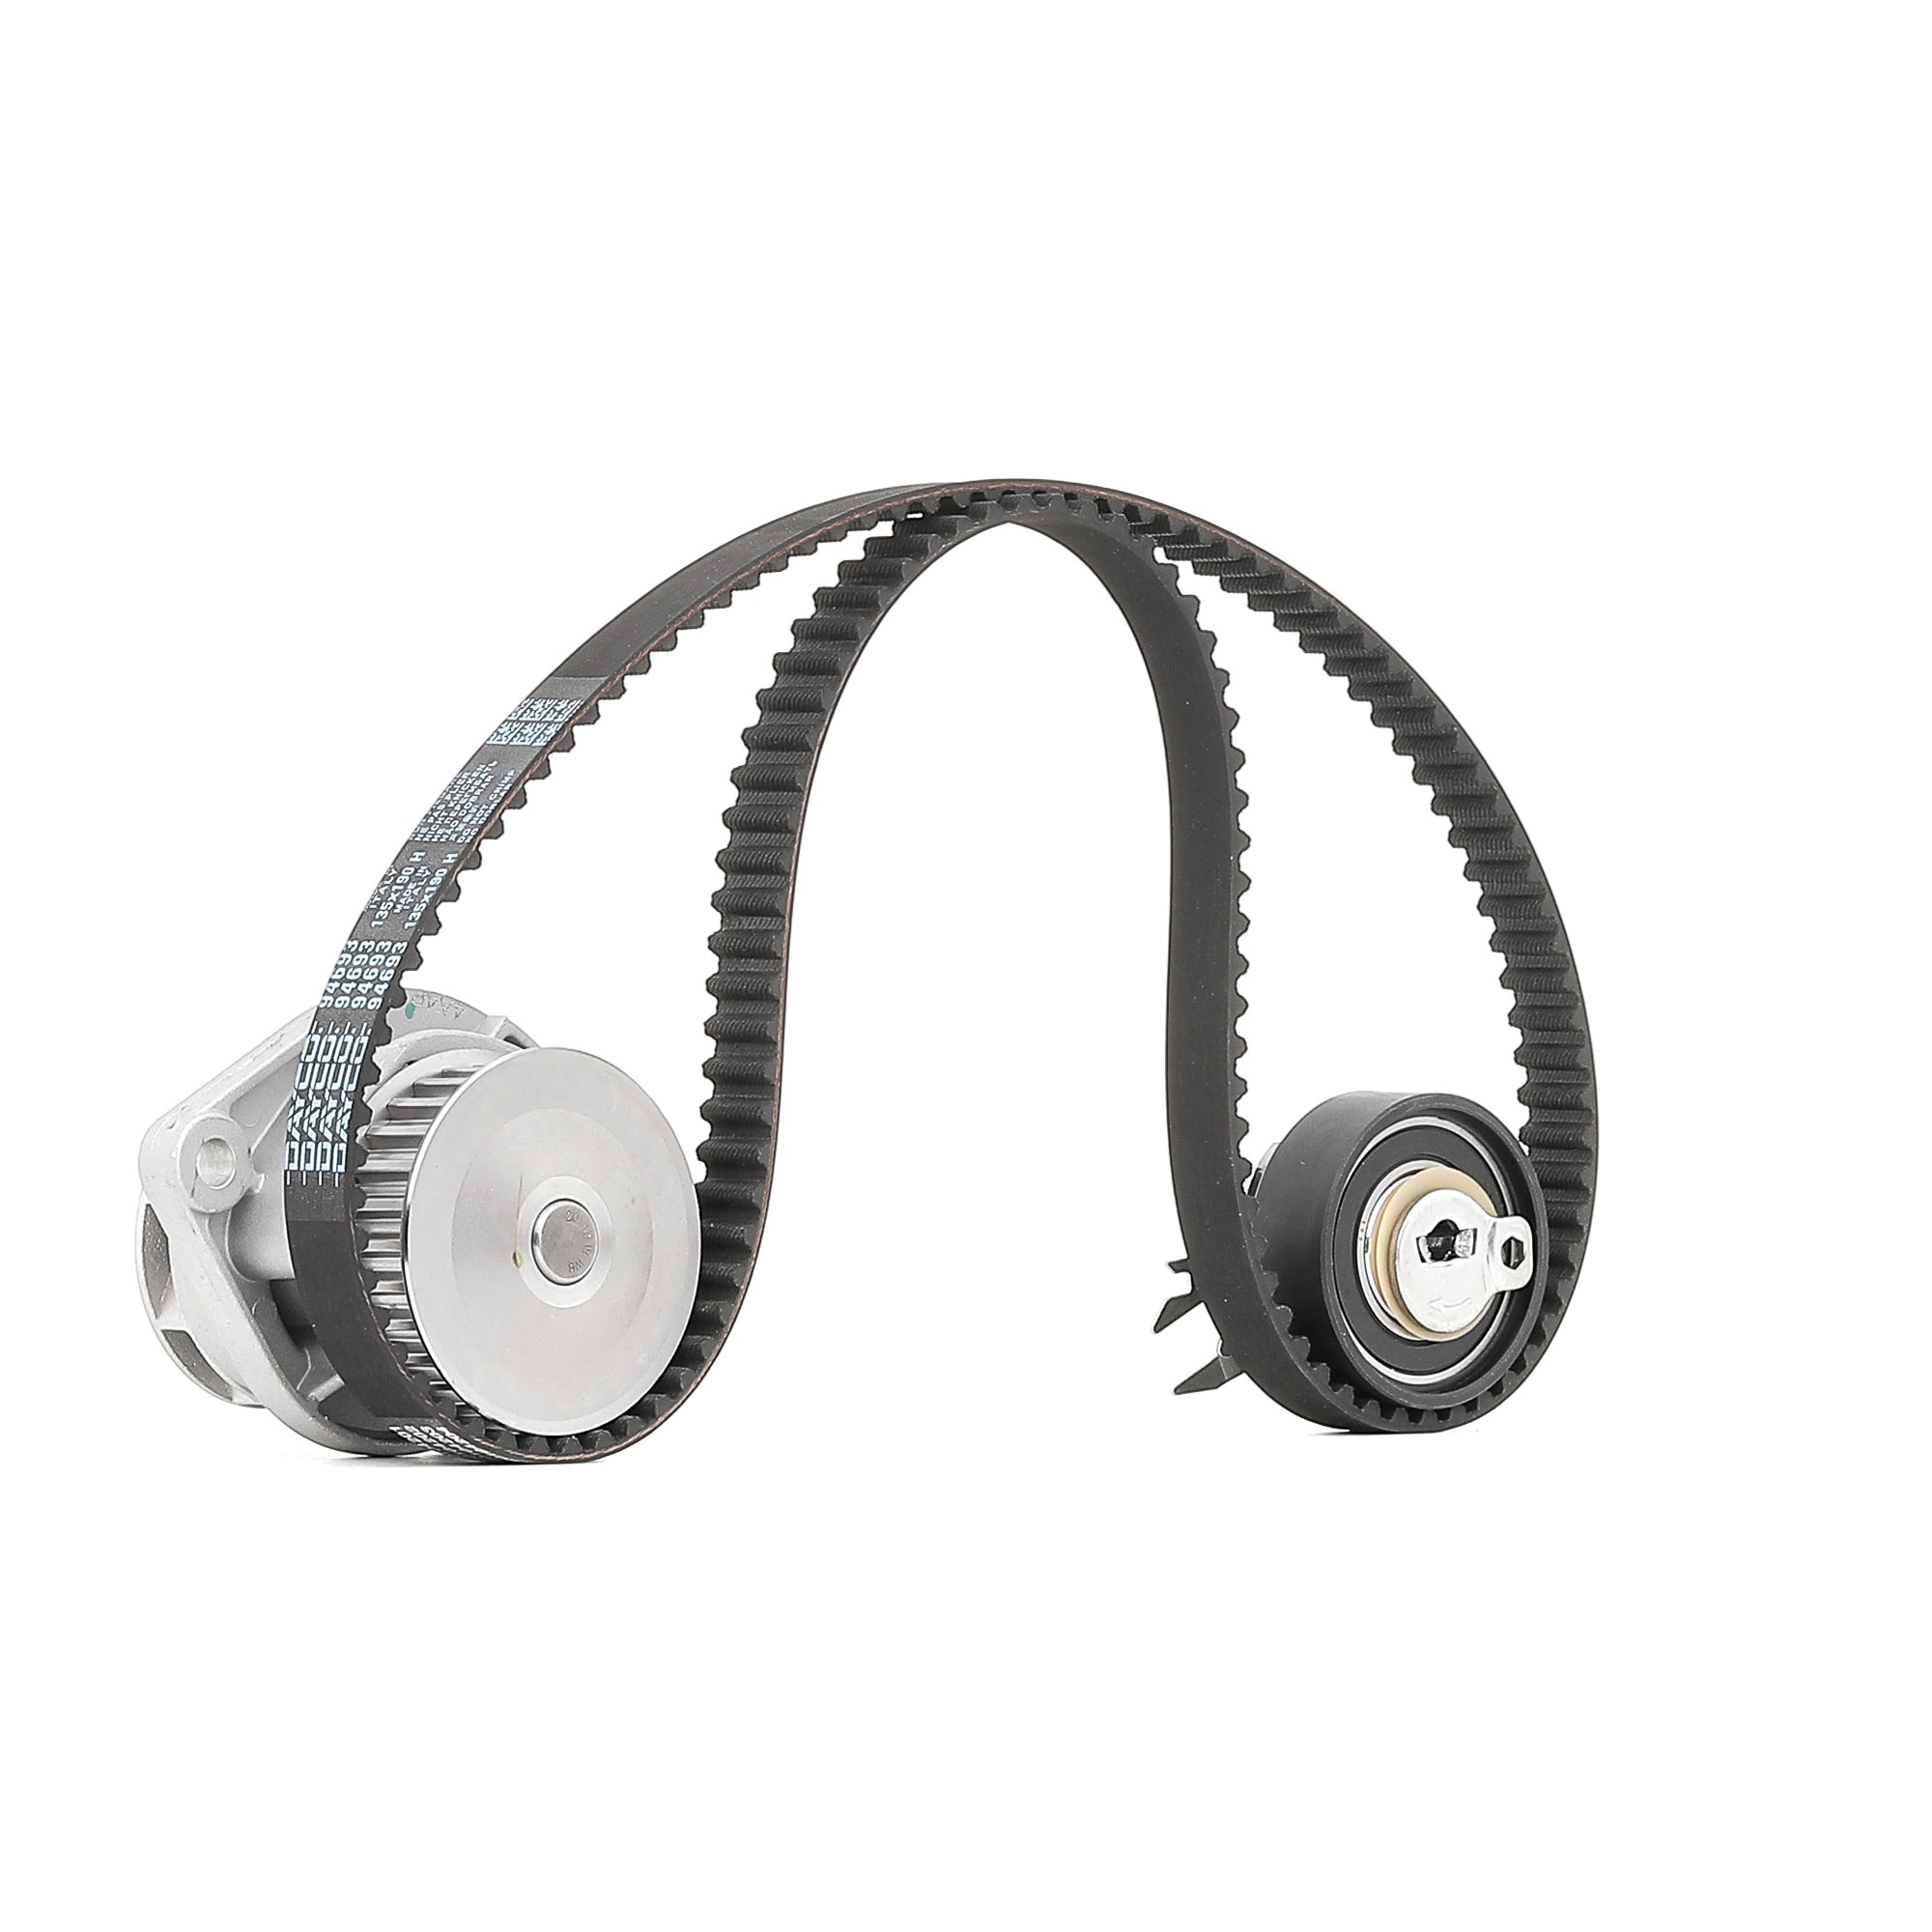 MAGNETI MARELLI 132011160047 Water pump and timing belt kit Number of Teeth: 135 L: 1080 mm, Width: 19 mm